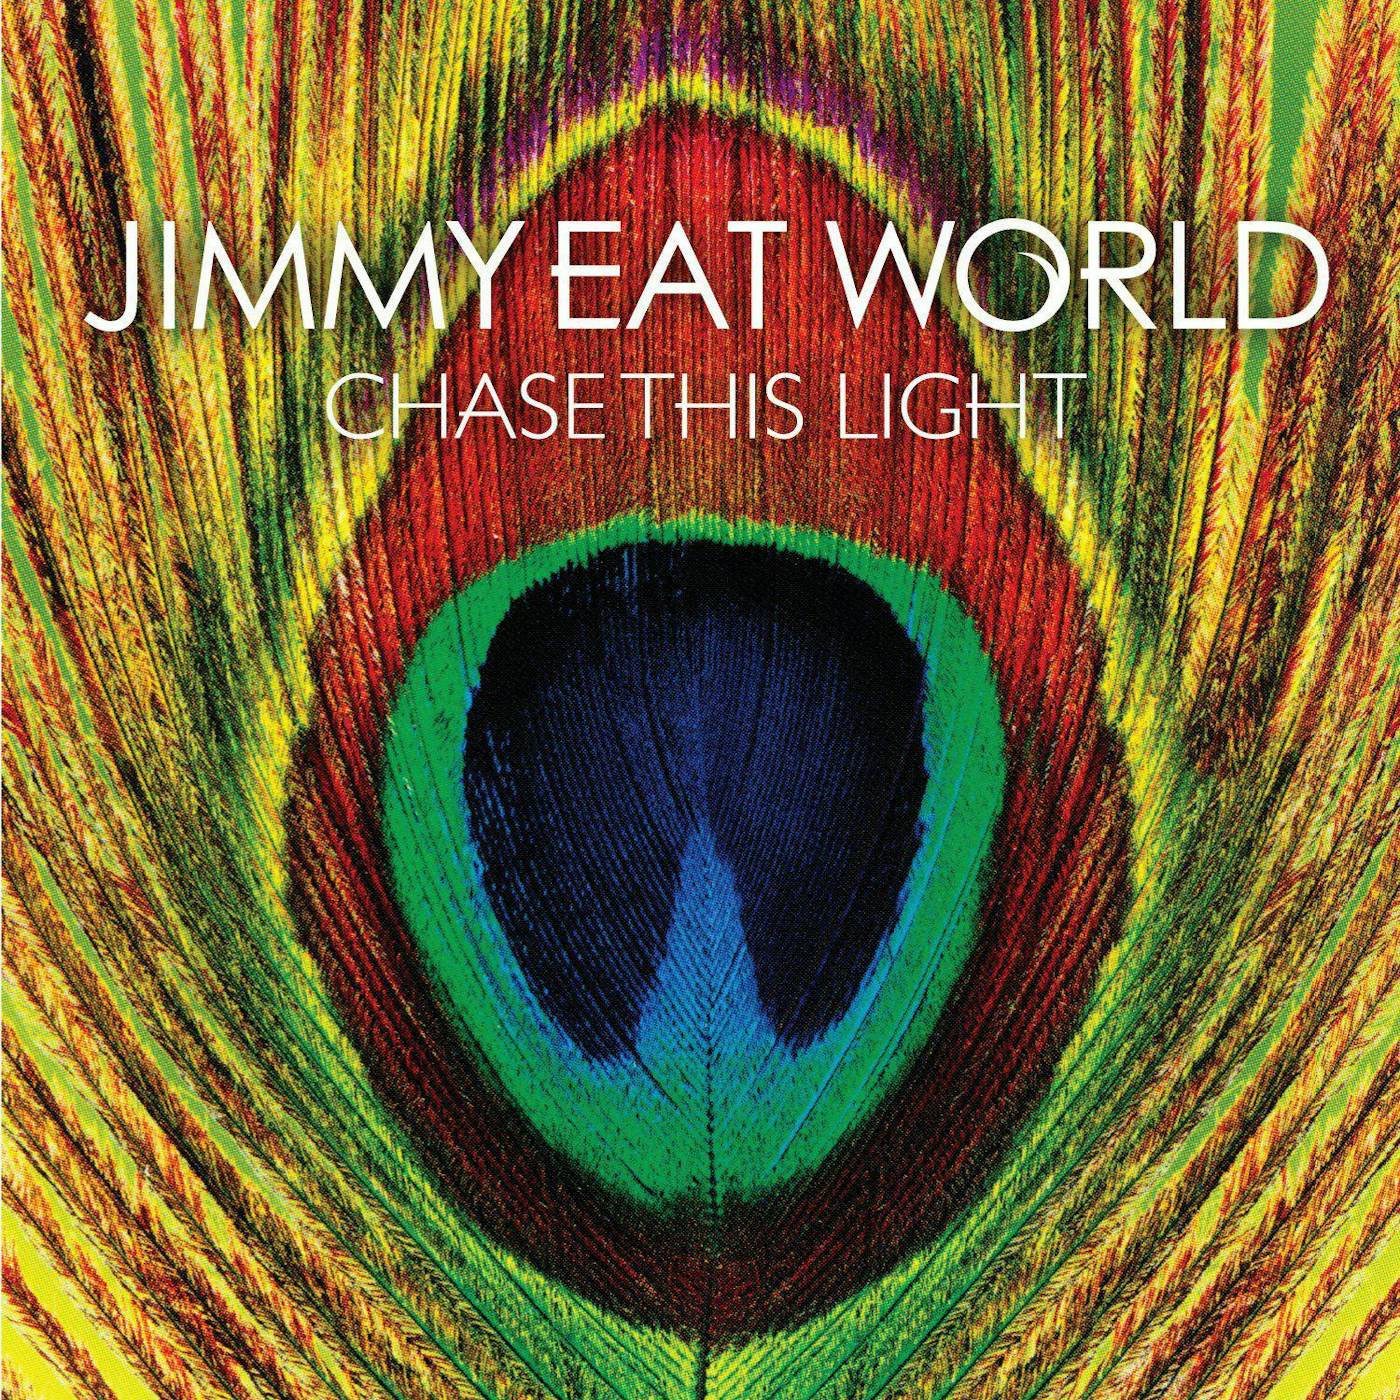 Jimmy Eat World Chase This Light Vinyl Record